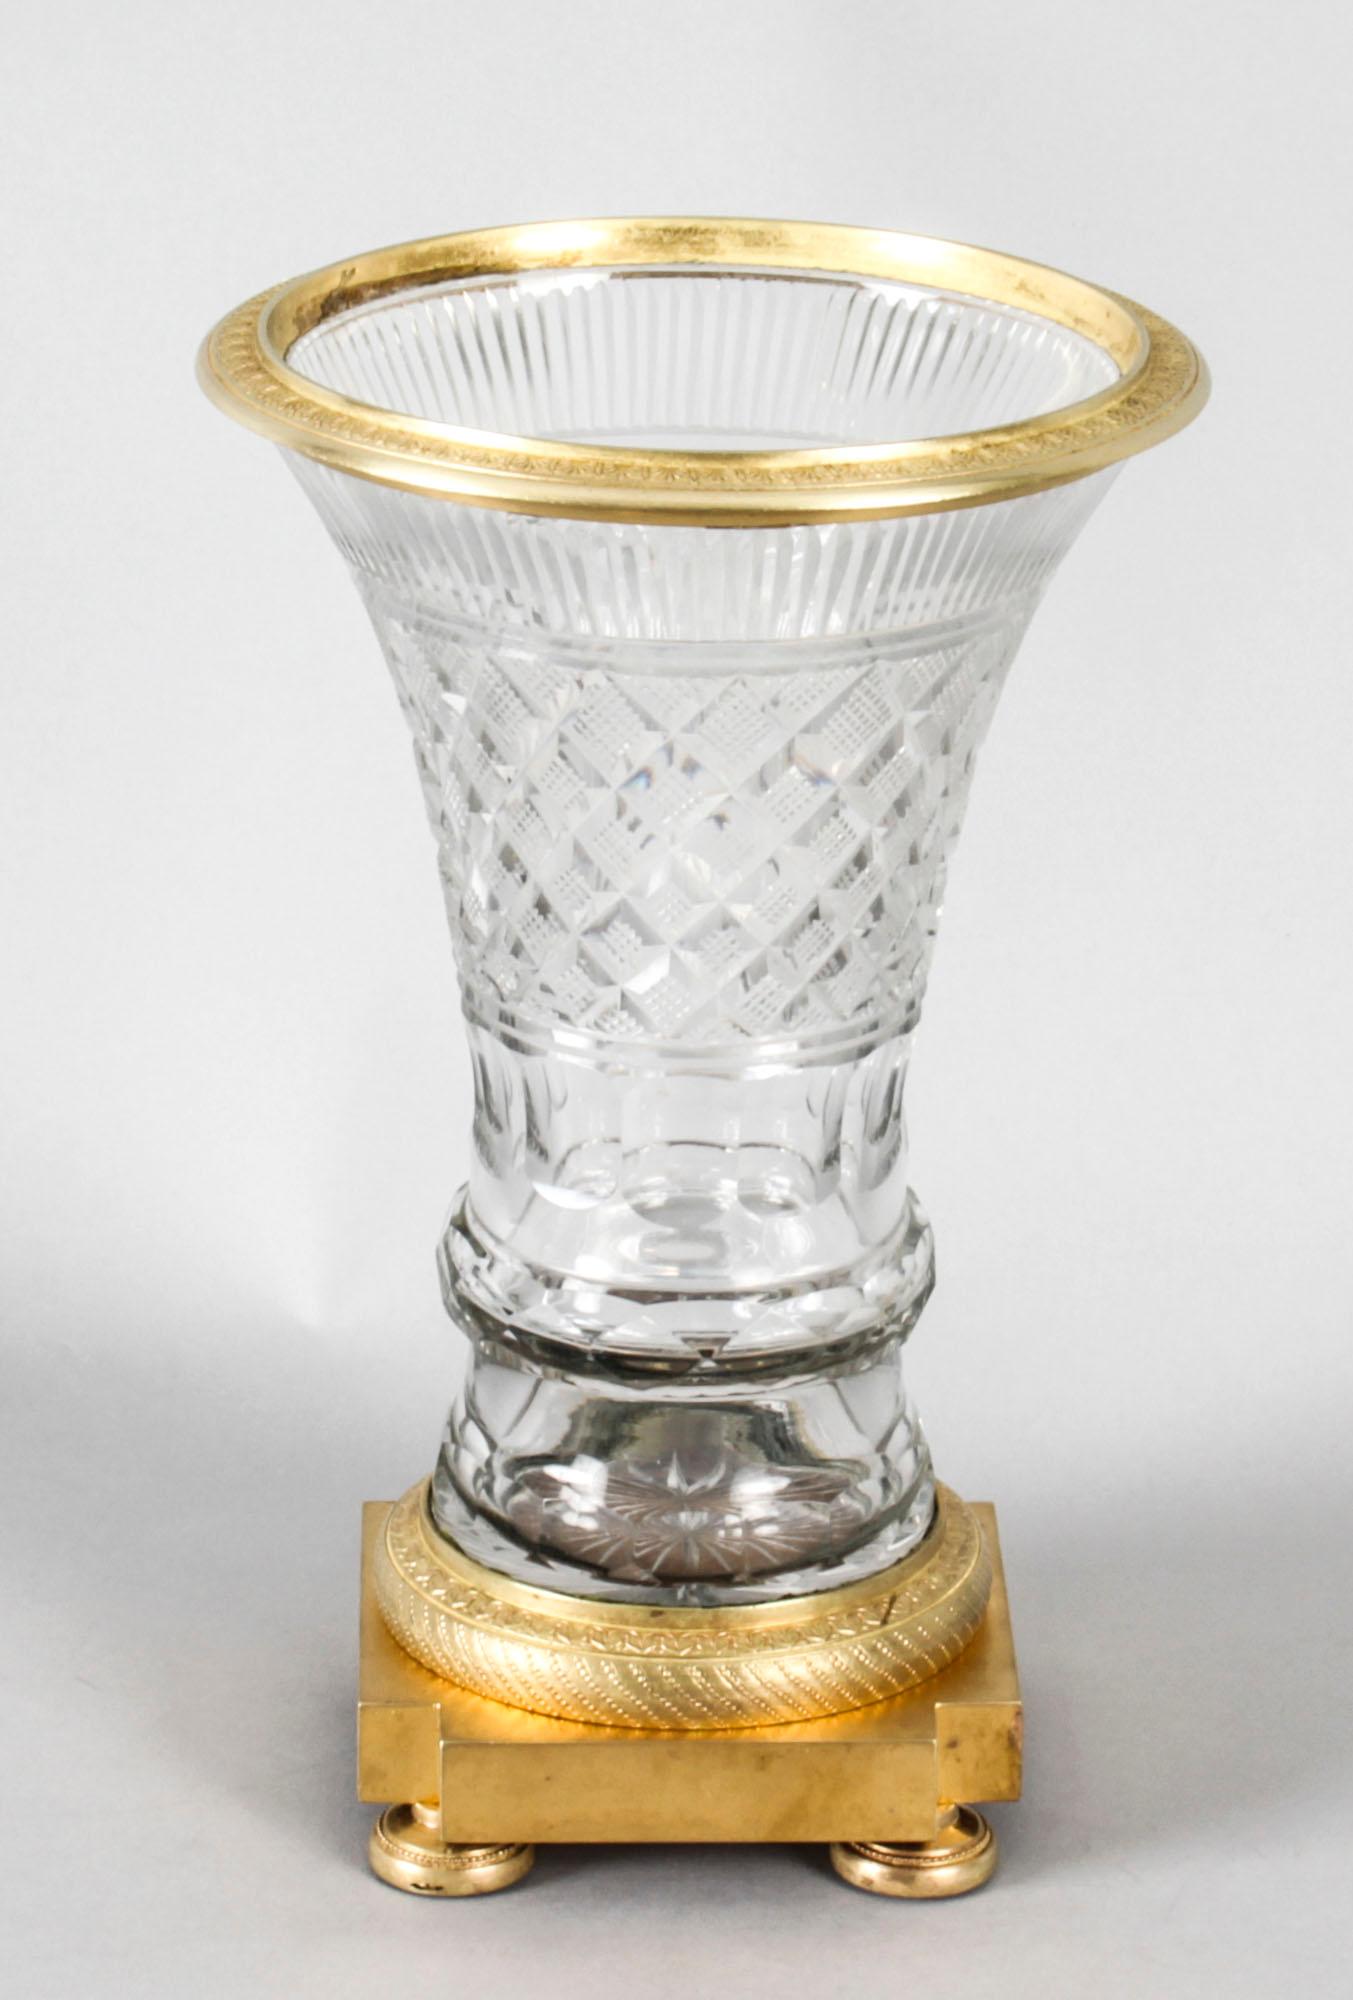 A superb quality antique French cut crystal and ormolu mounted Borghese Campana vase, circa 1830 in date. 

The trumpet shaped vase features hobnail-cut clear crystal glass design with a scalloped ormolu mouth on fillet and square section plinth